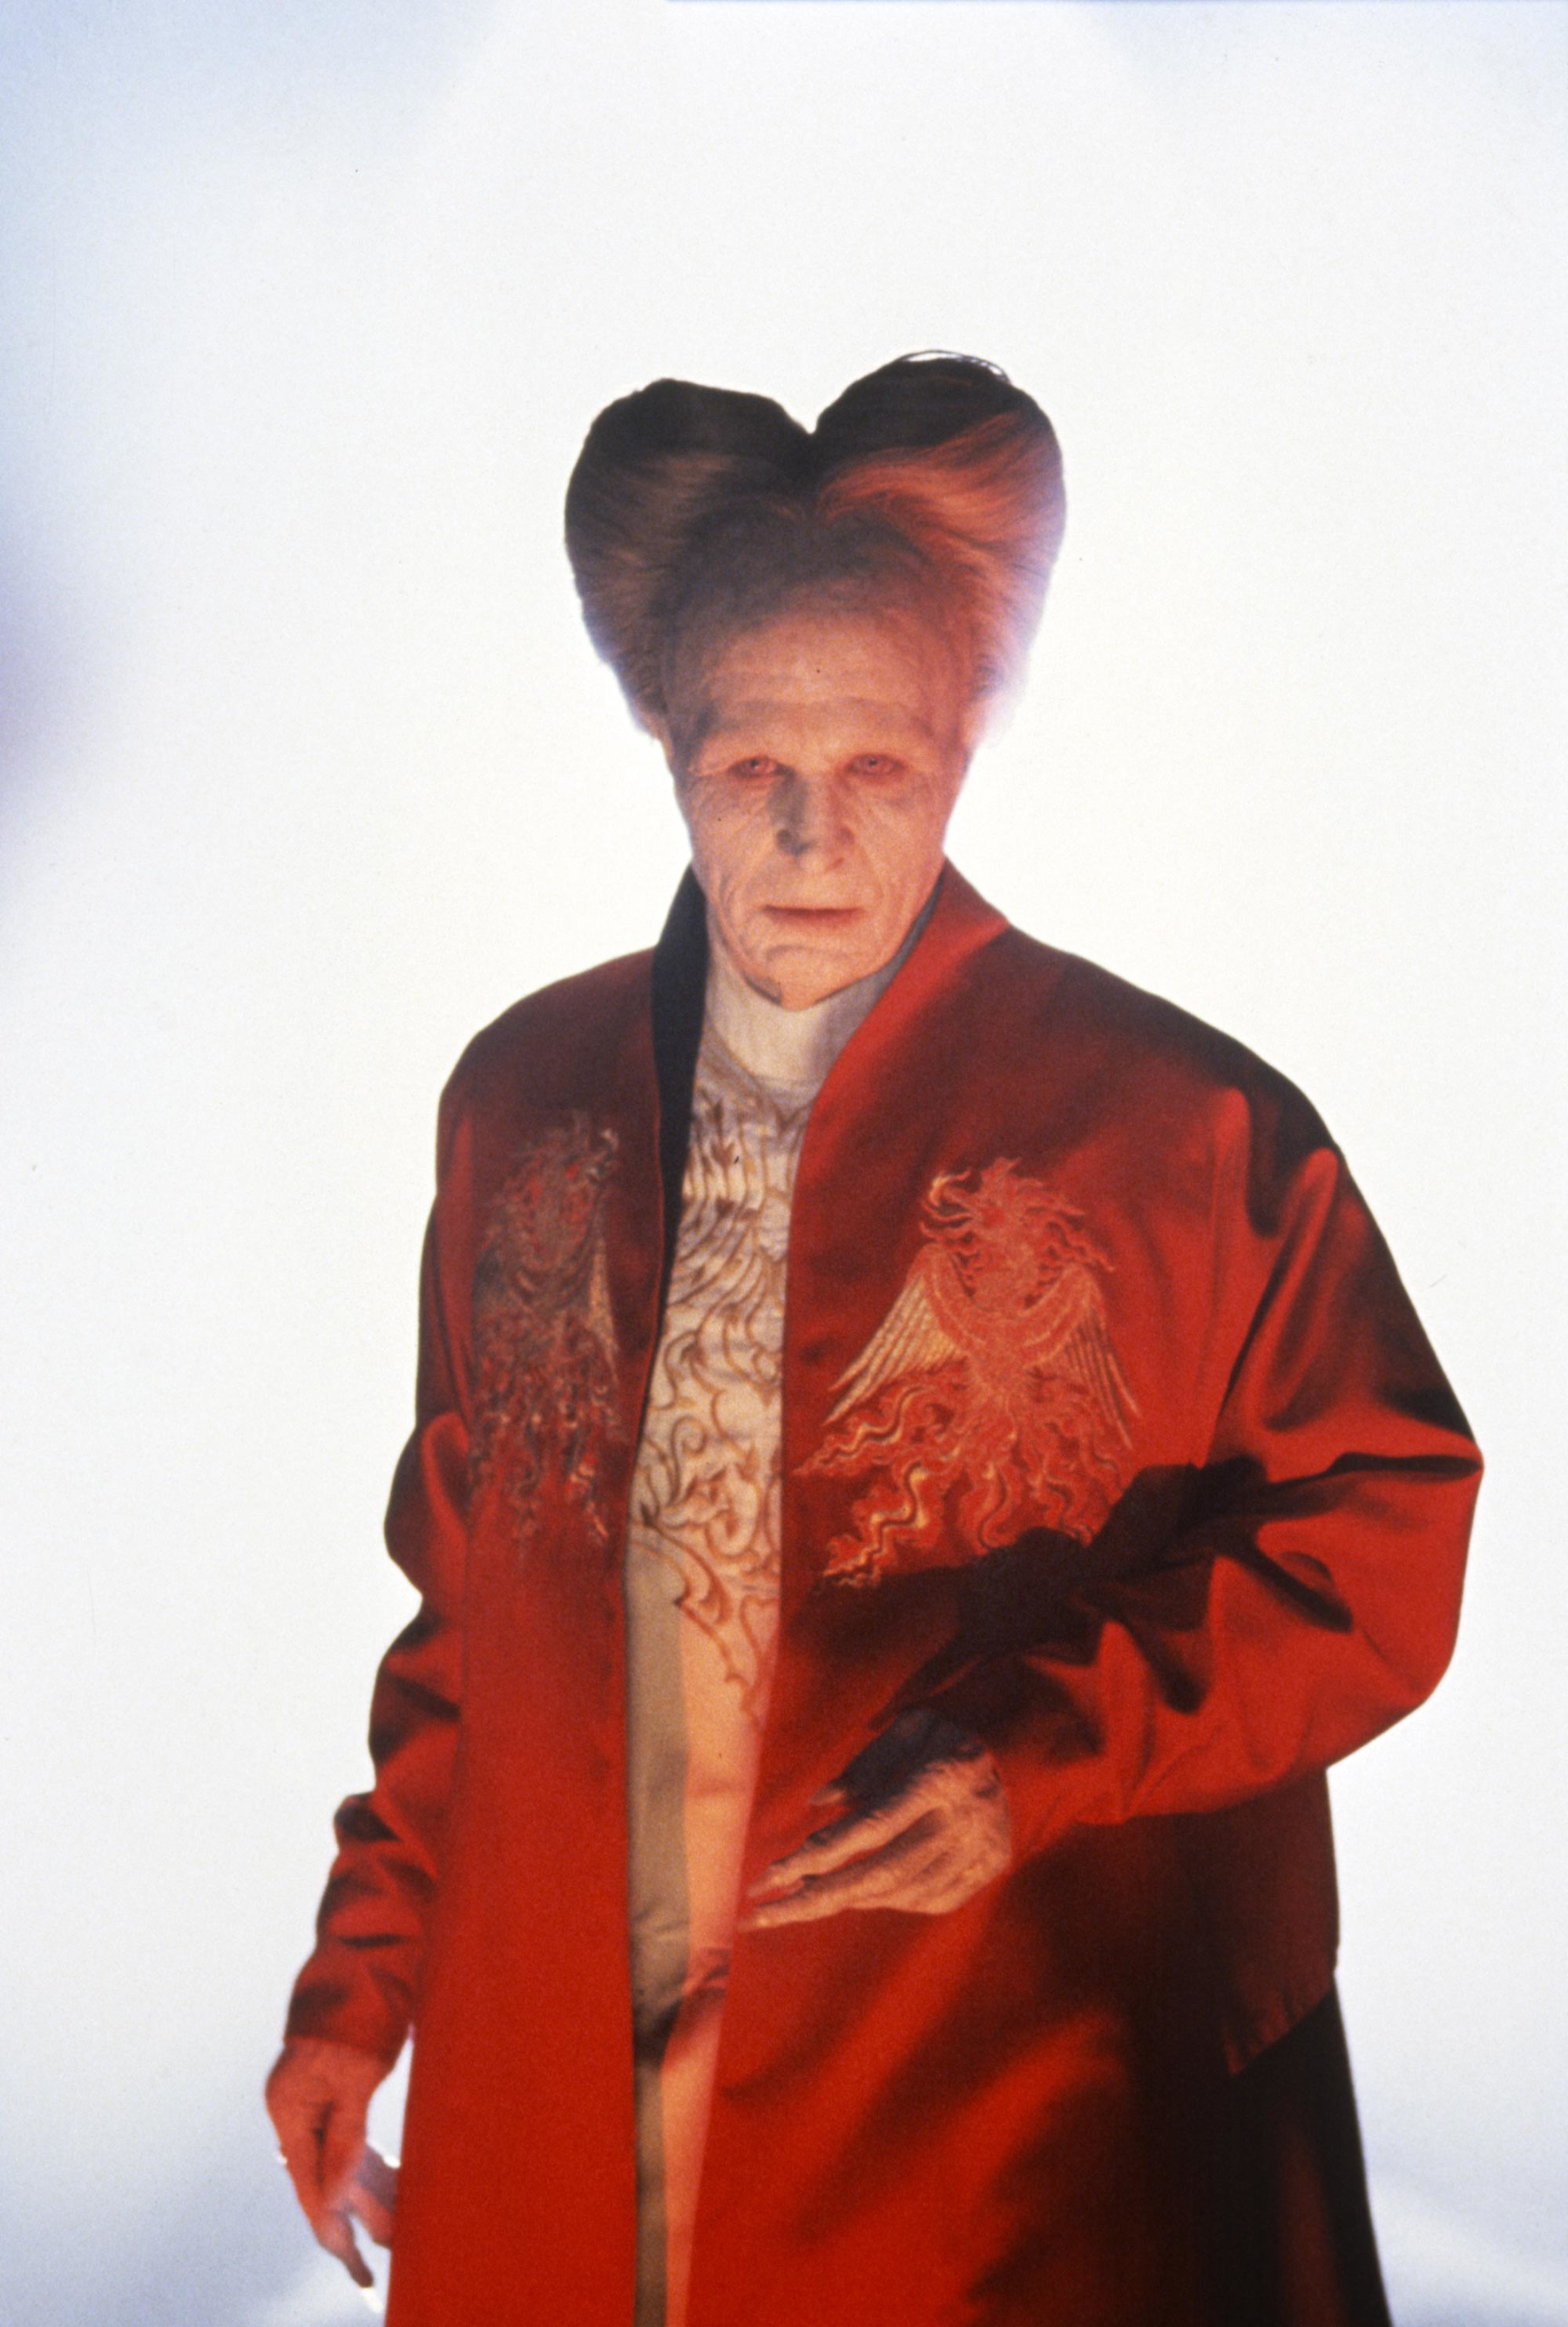 Publicity portrait of Gary Oldman from <i>Bram Stoker's Dracula</i>, 1992. Photo credit: Ralph Nelson. Eiko Ishioka papers, Margaret Herrick Library, Academy of Motion Picture Arts and Sciences.